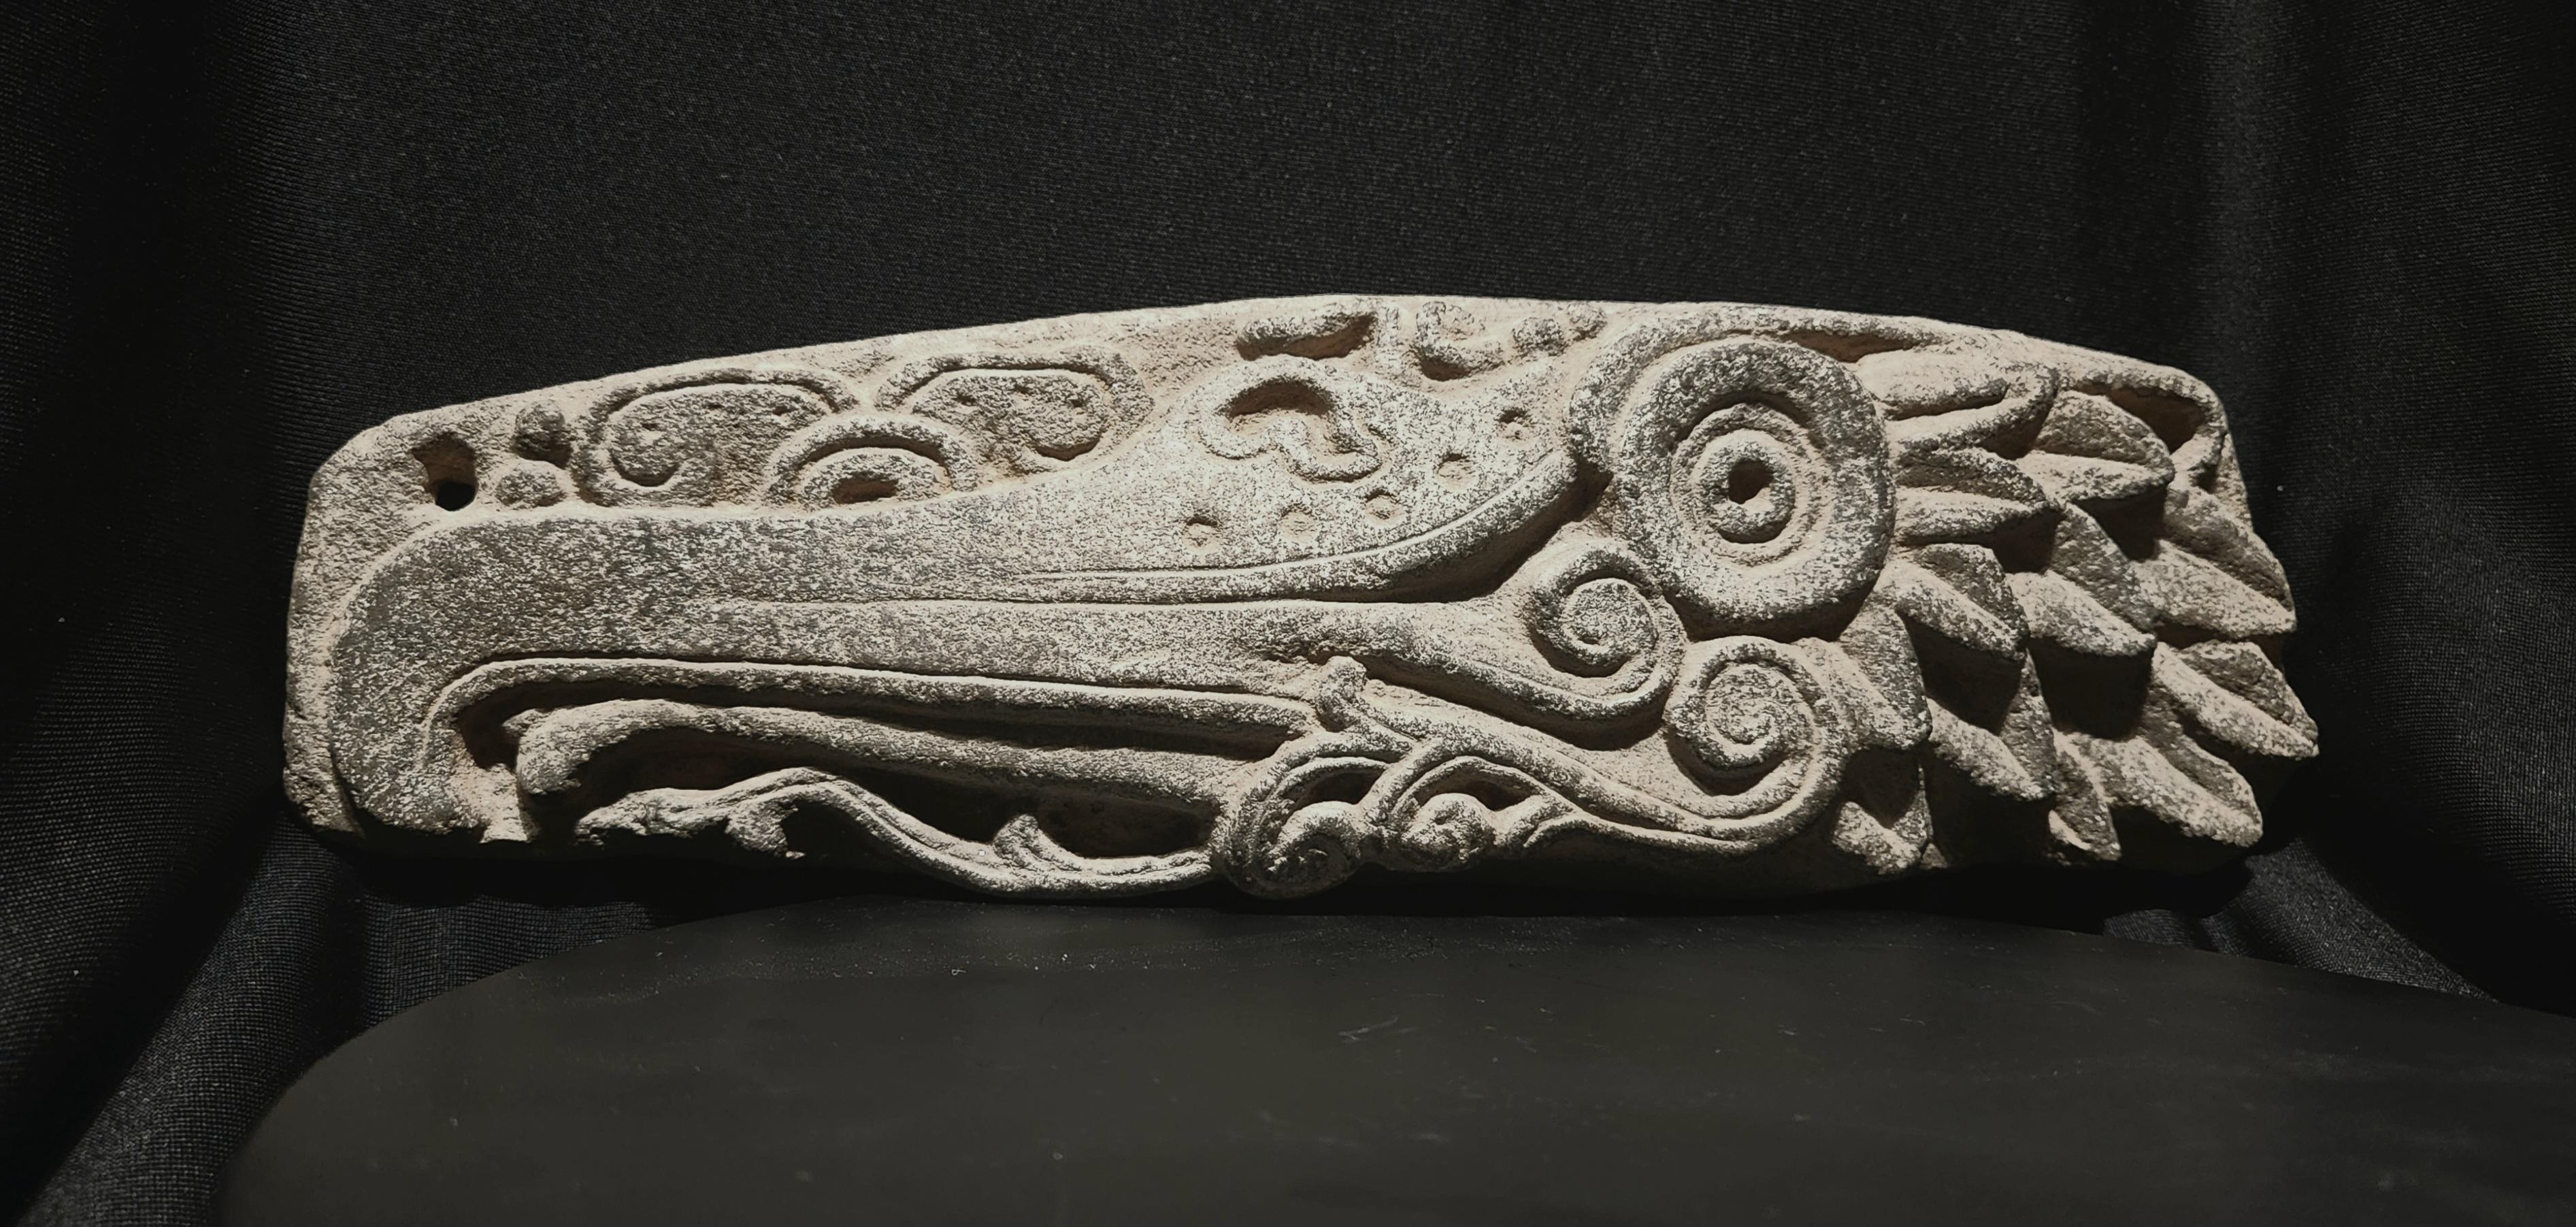 This magnificent panel is an example of the pinnacle of Maya stone carving.
It  depicts the head of a cormorant in profile, with a long hooked beak, curved tongue, large central eye, spiraling watery elements below, and deeply carved feathers on the